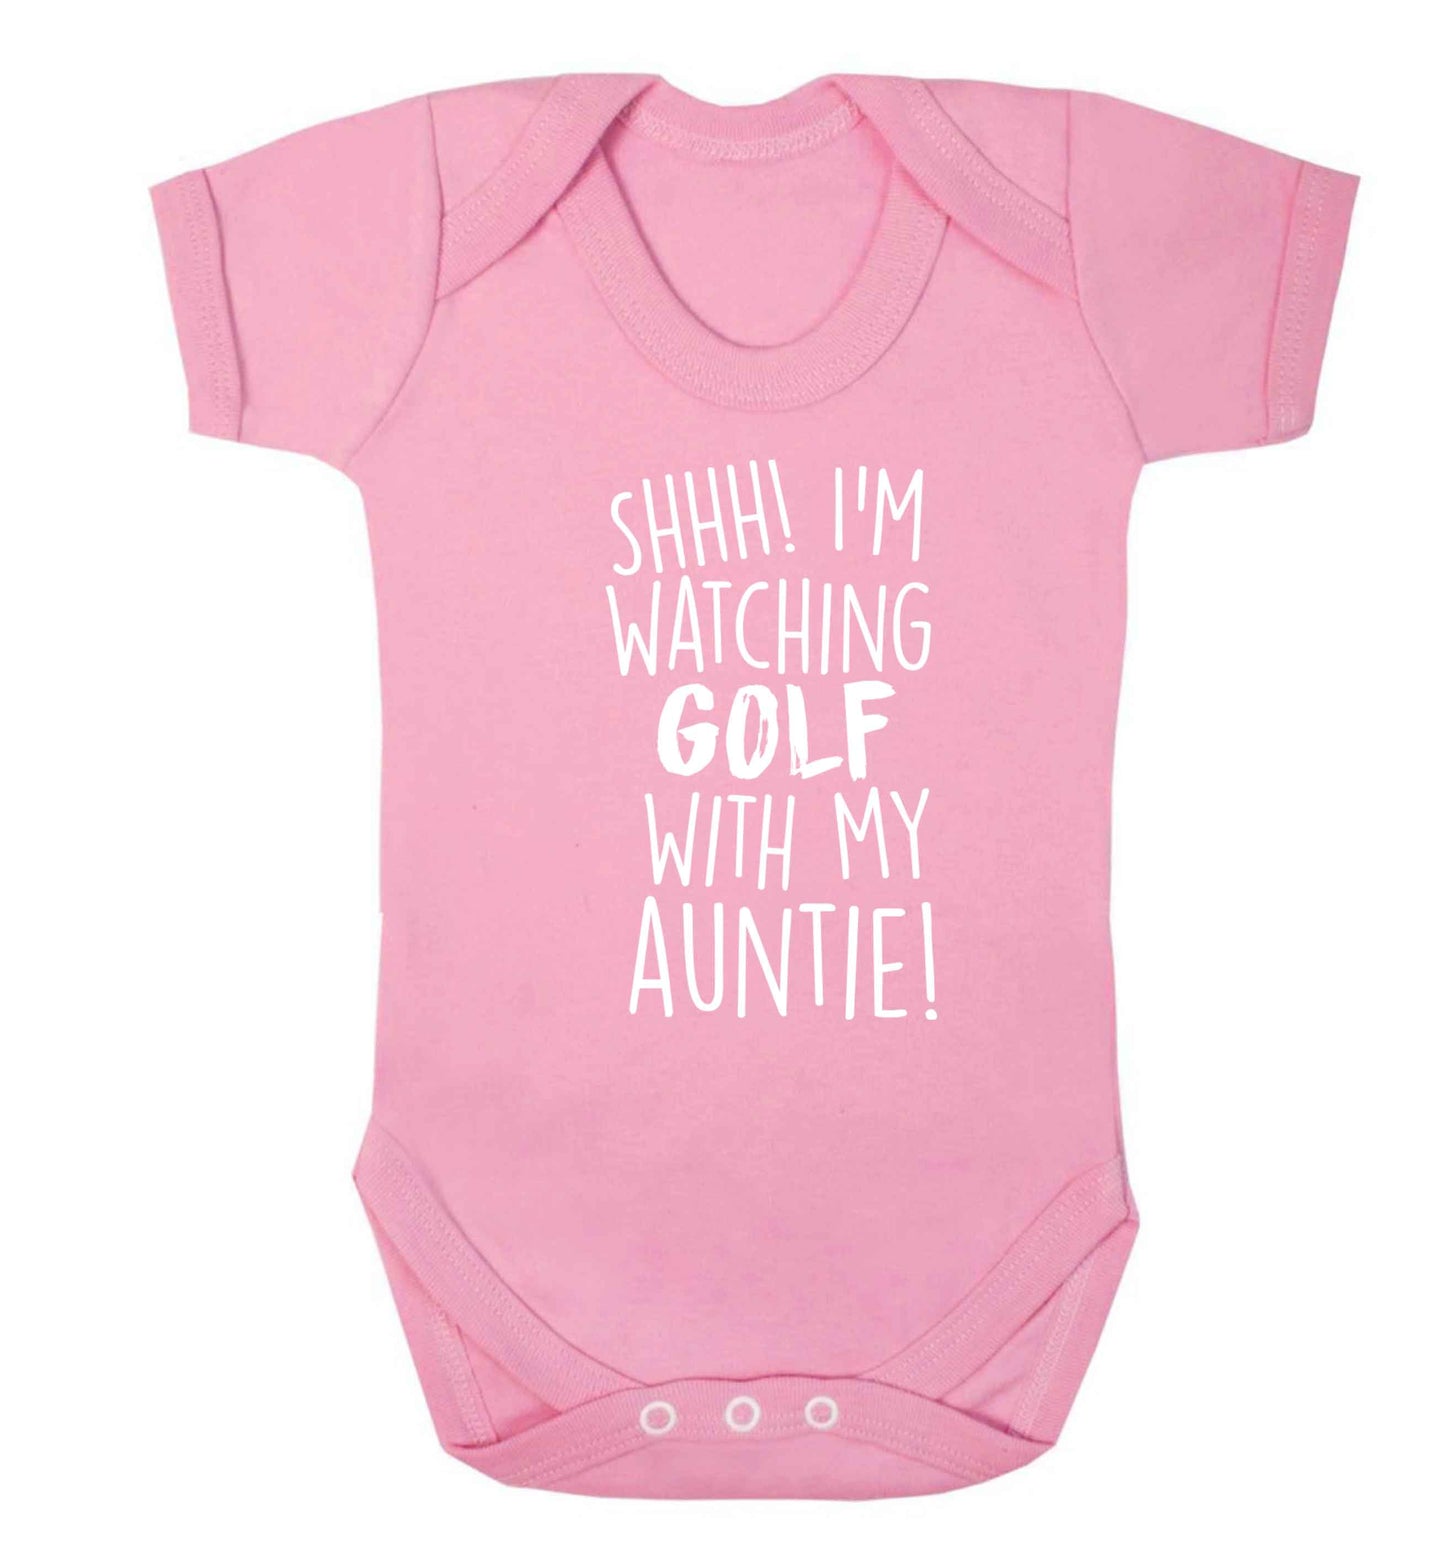 Shh I'm watching golf with my auntie Baby Vest pale pink 18-24 months